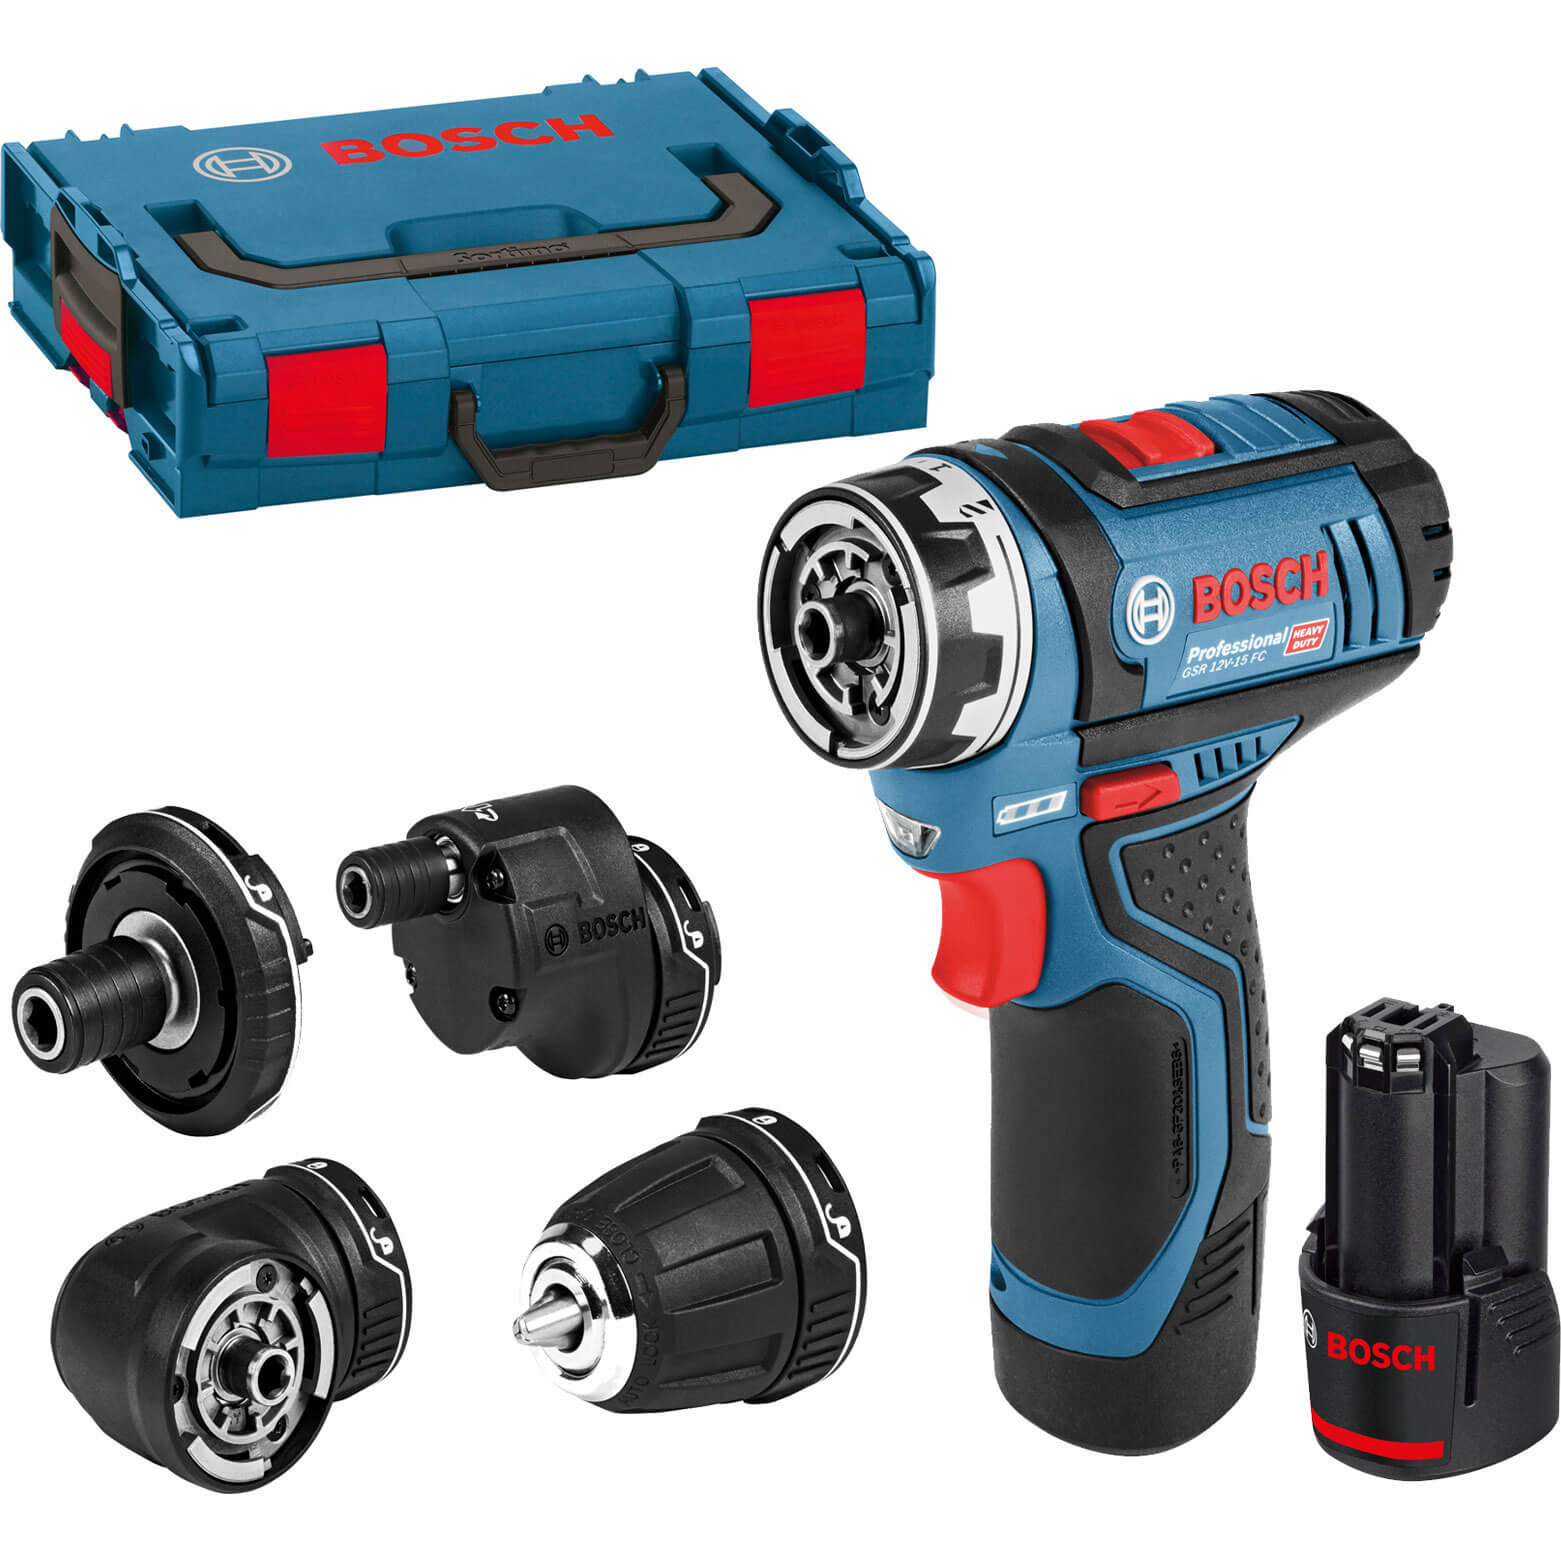 Image of Bosch GSR 12 V-15 FC Cordless Flexiclick Drill Driver 2 x 2ah Li-ion Charger Case & Accessories